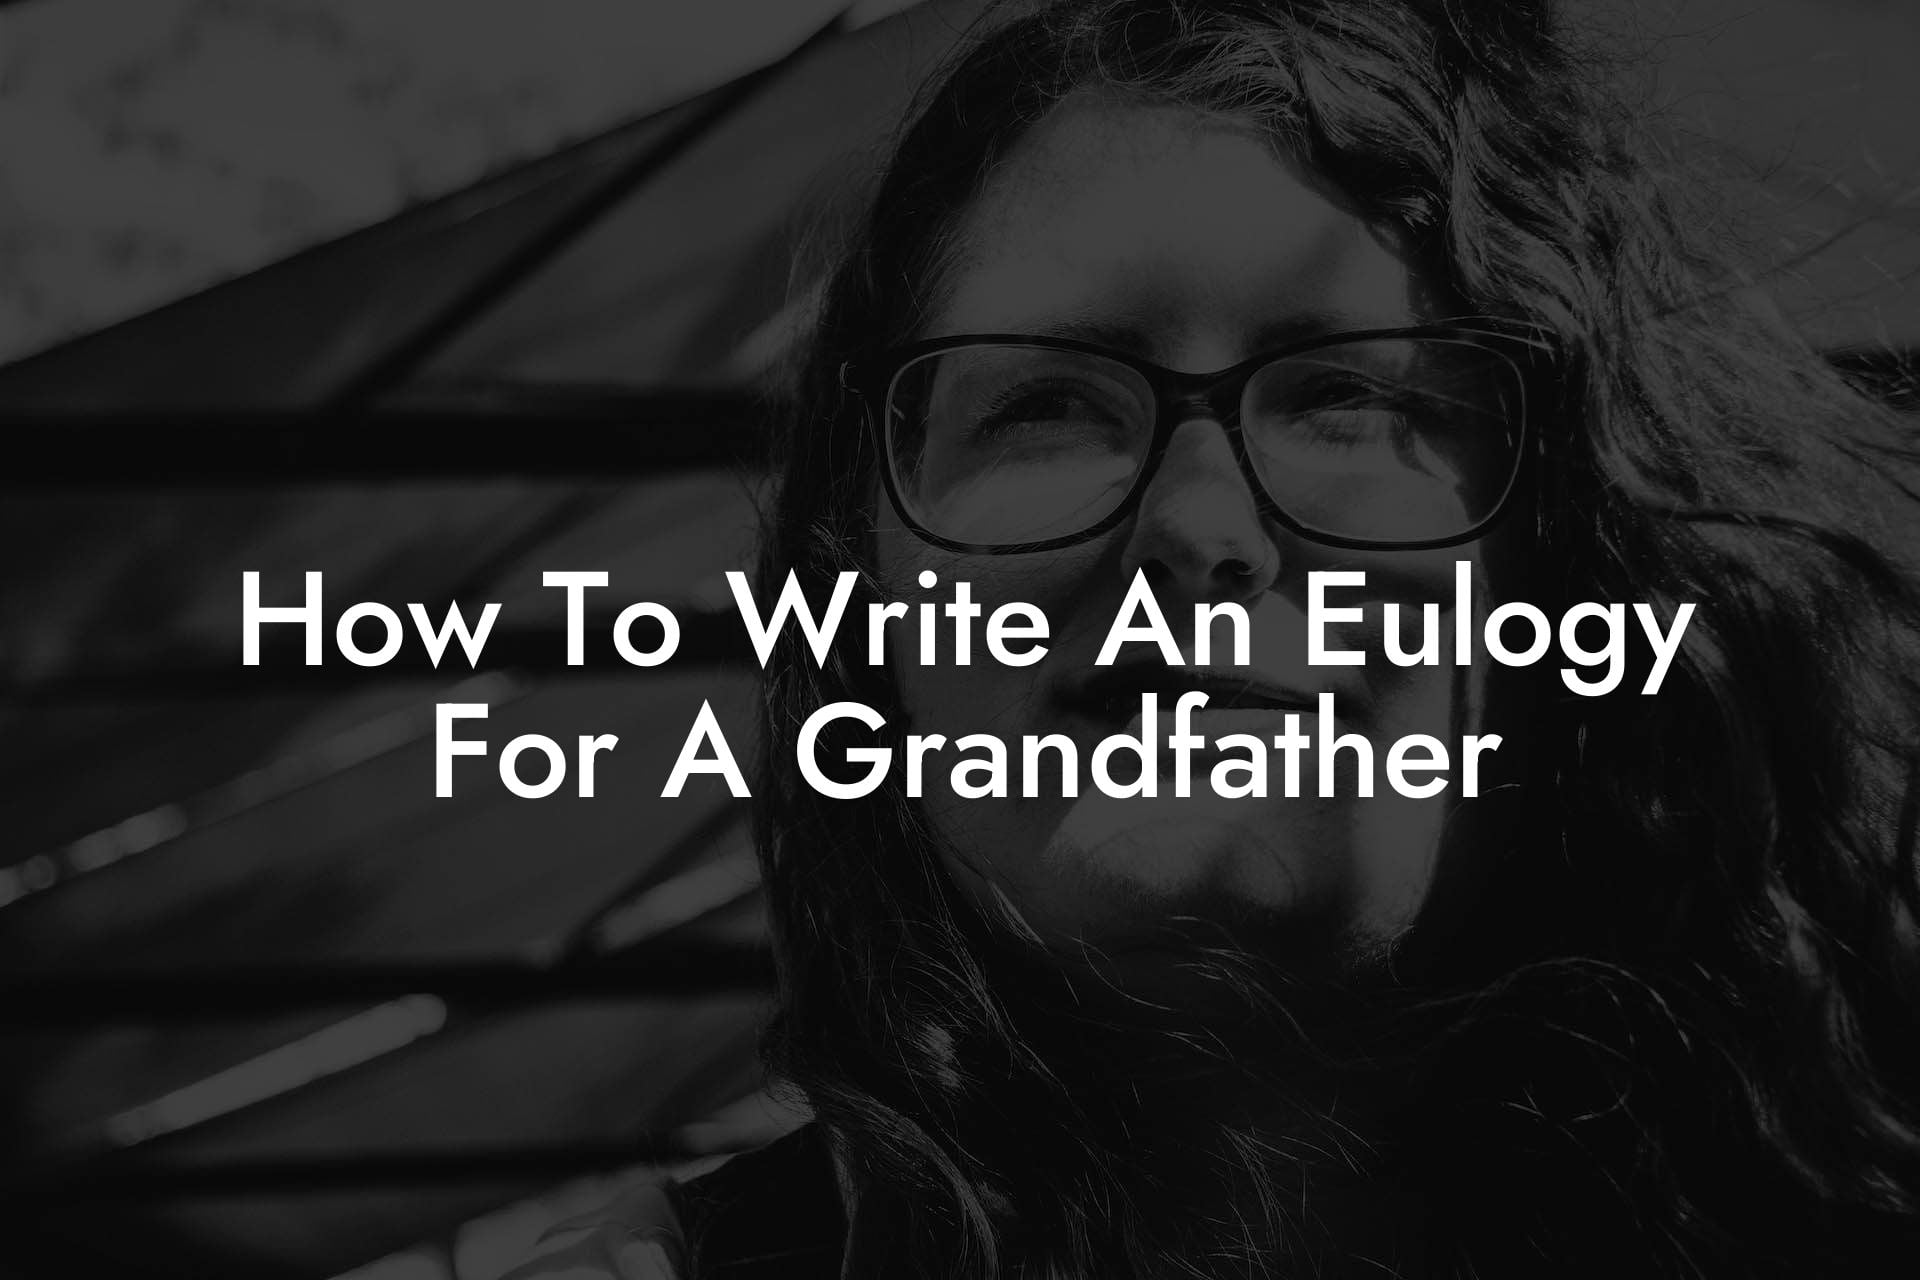 How To Write An Eulogy For A Grandfather